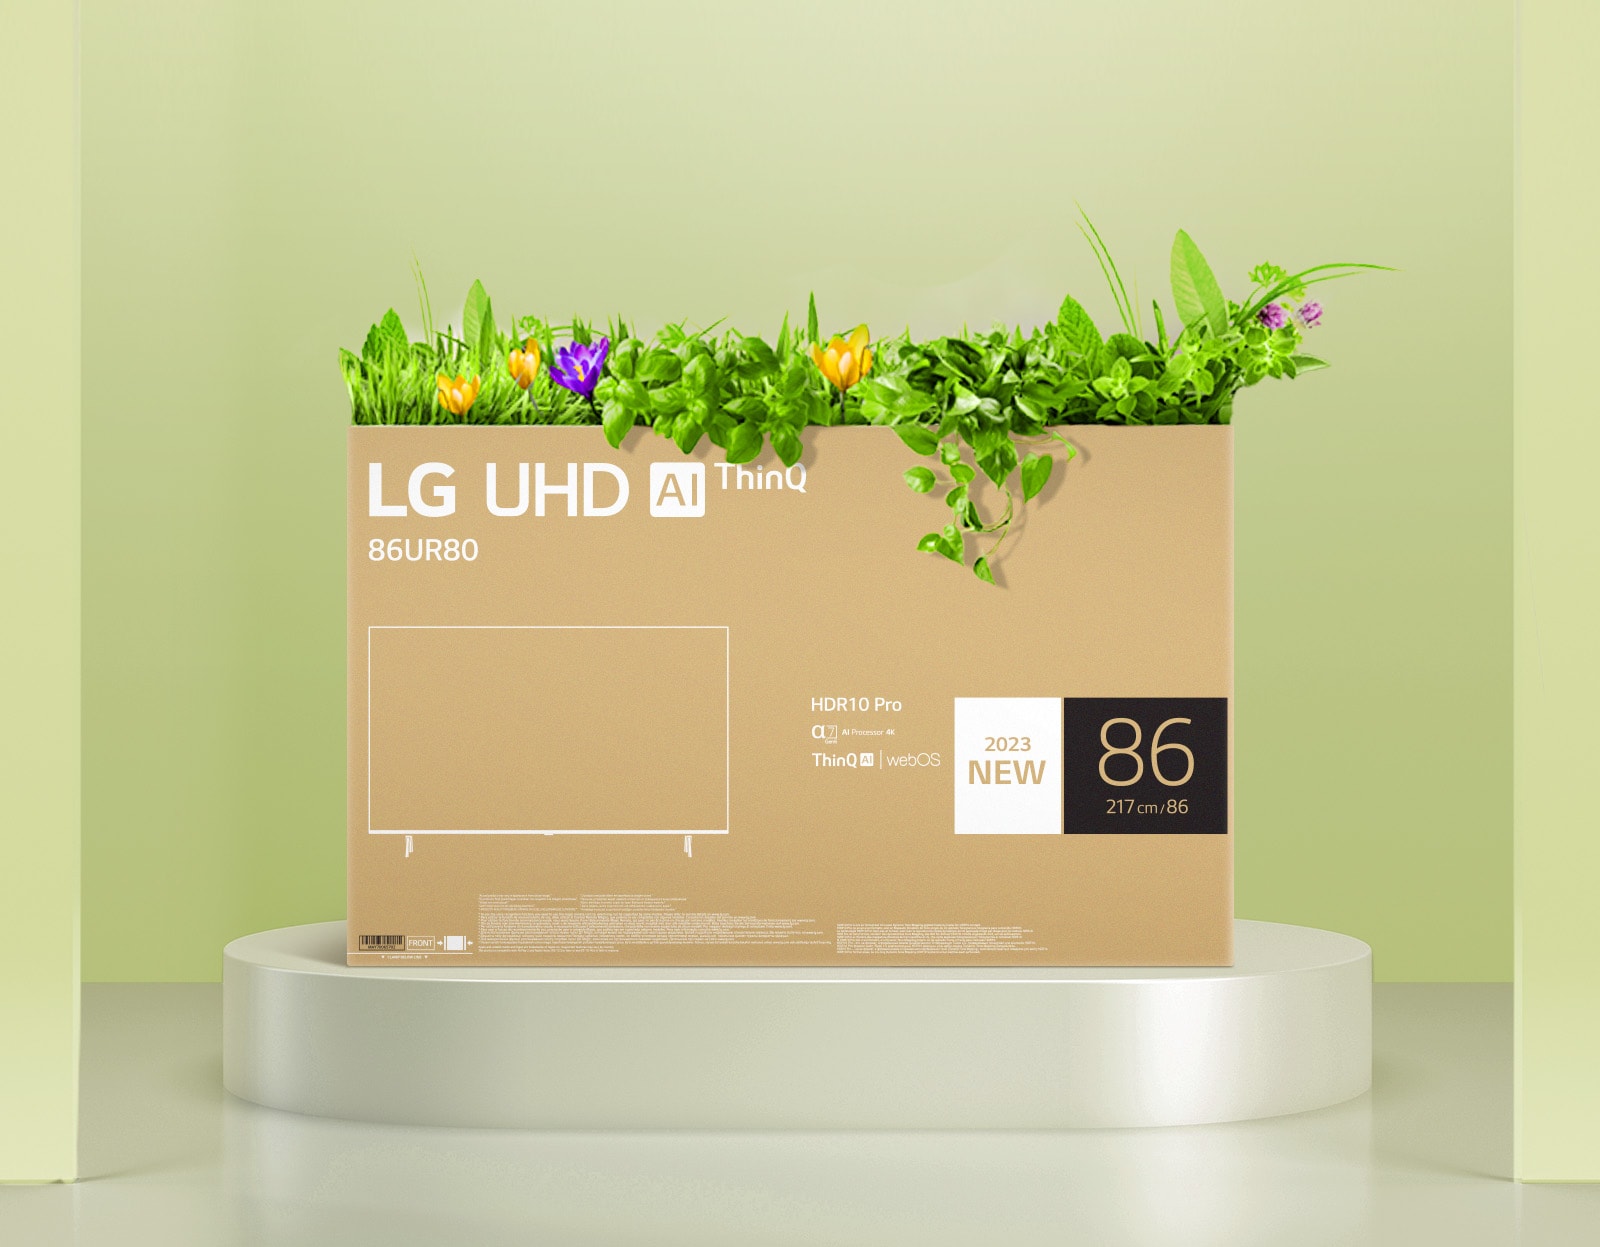 A flower box recycled into an LG UHD TV package.